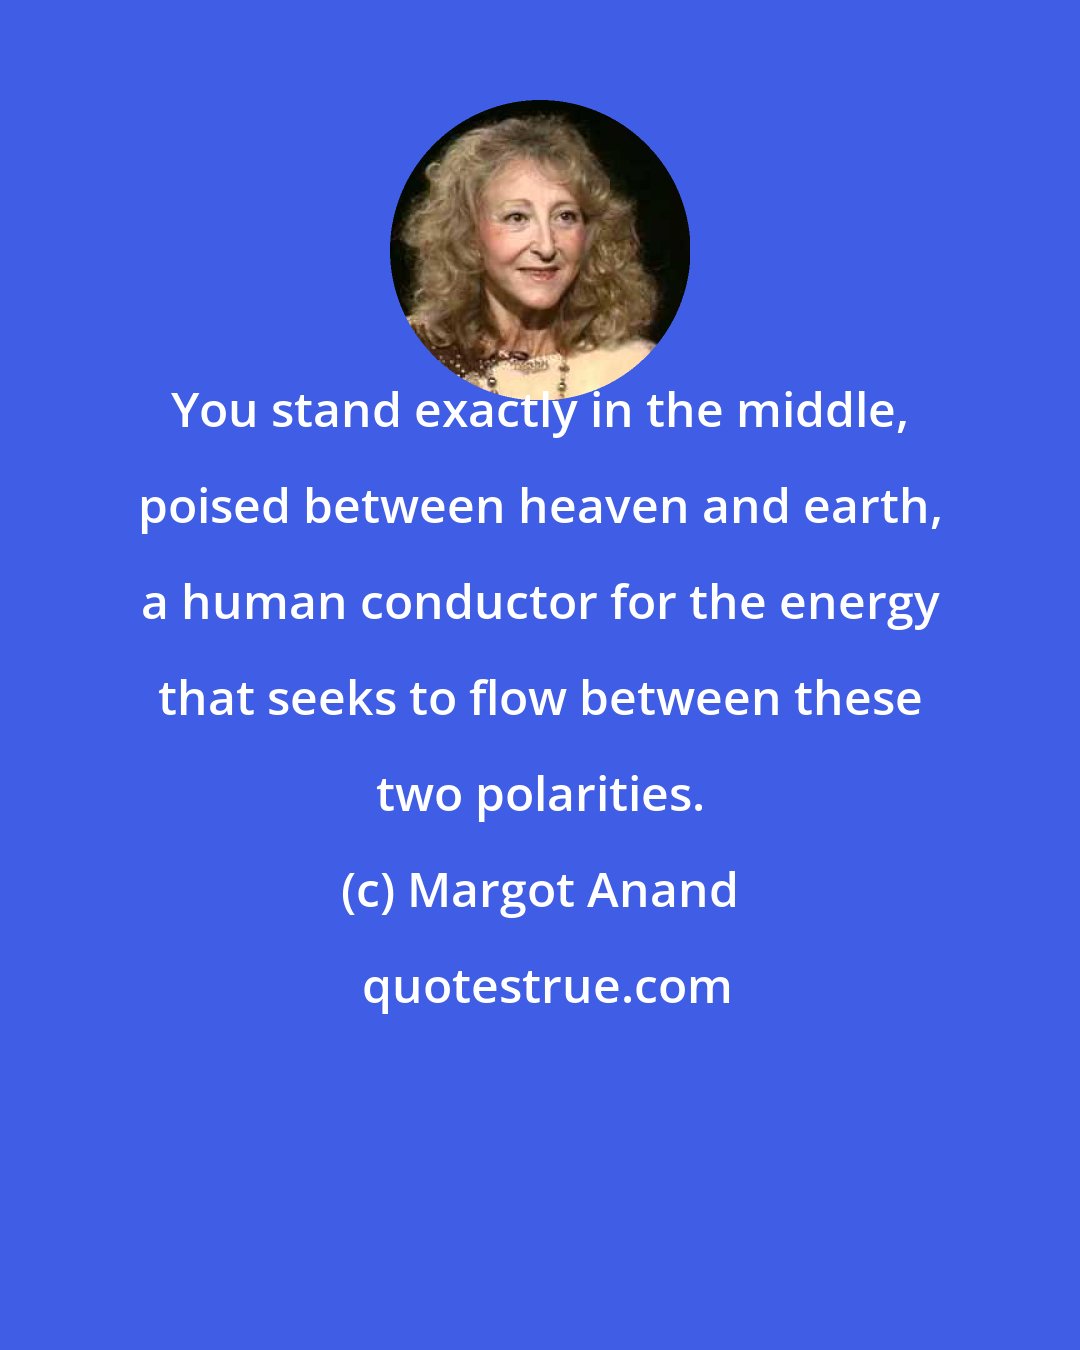 Margot Anand: You stand exactly in the middle, poised between heaven and earth, a human conductor for the energy that seeks to flow between these two polarities.